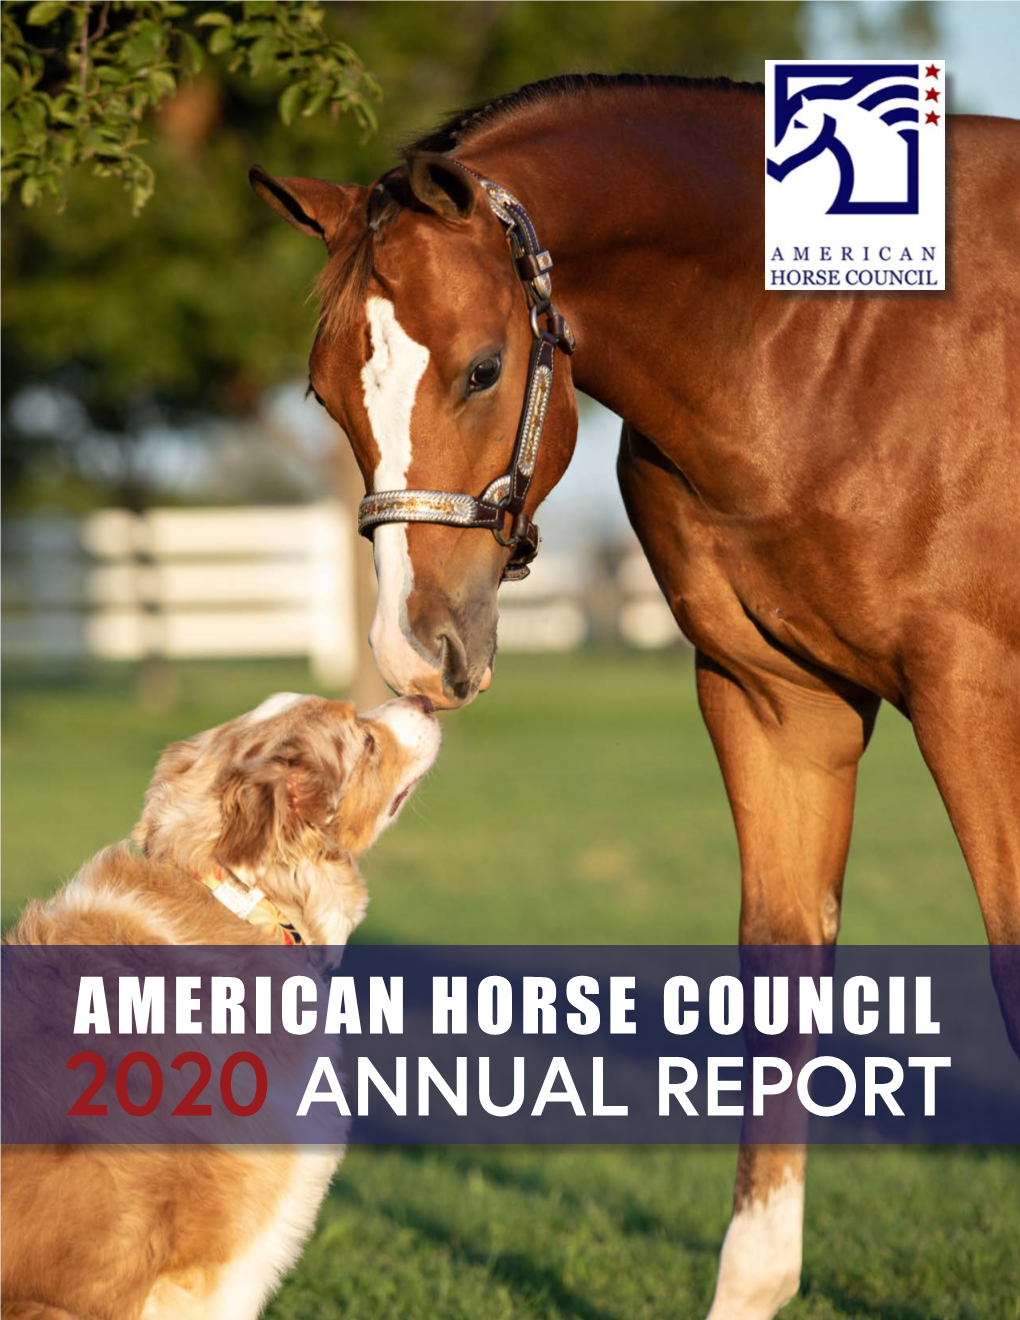 2020 ANNUAL REPORT PRESIDENT’S LETTER It Continues to Be a Wonderful Privilege to Serve This Great Organization and the Equine Industry